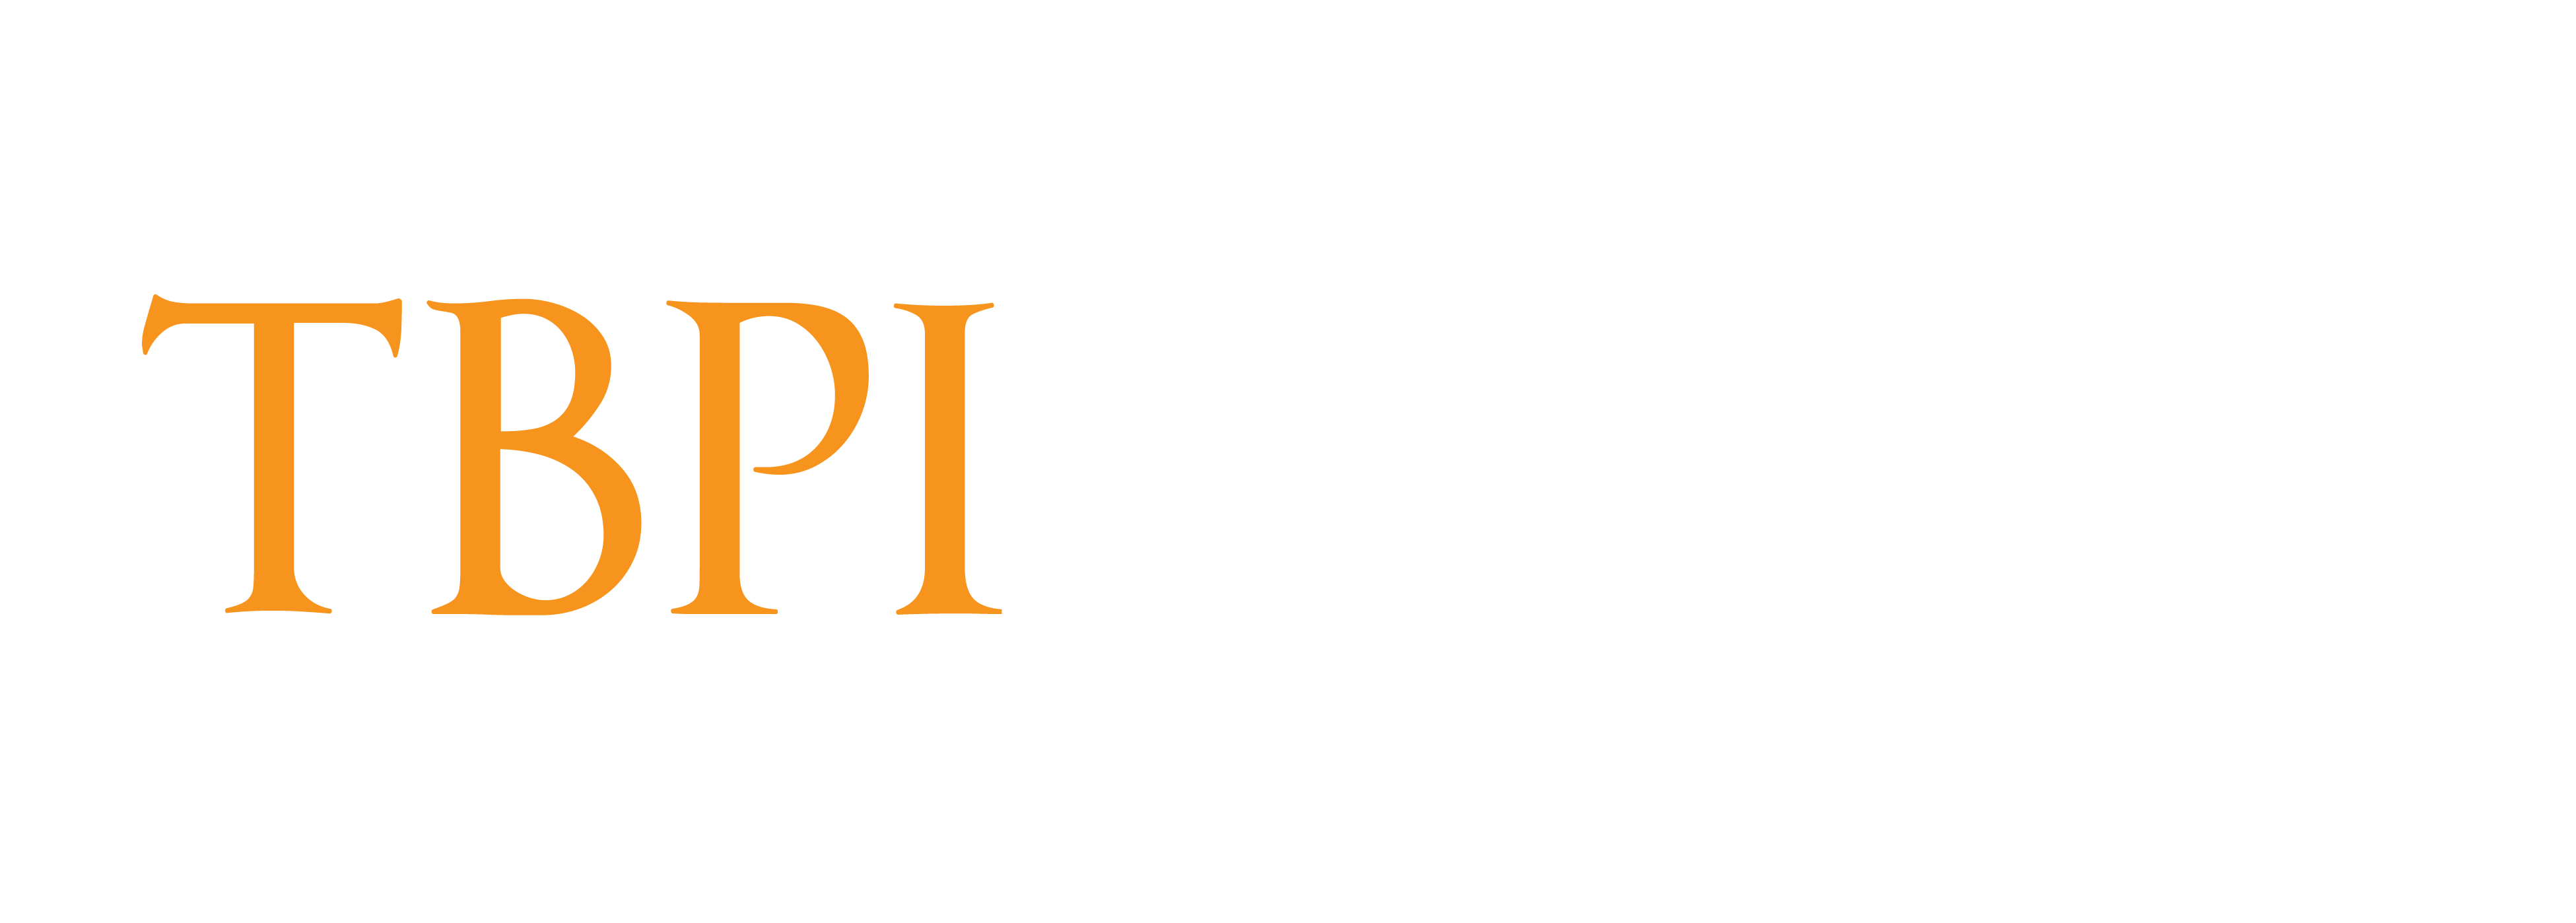 The Black Policy Institute